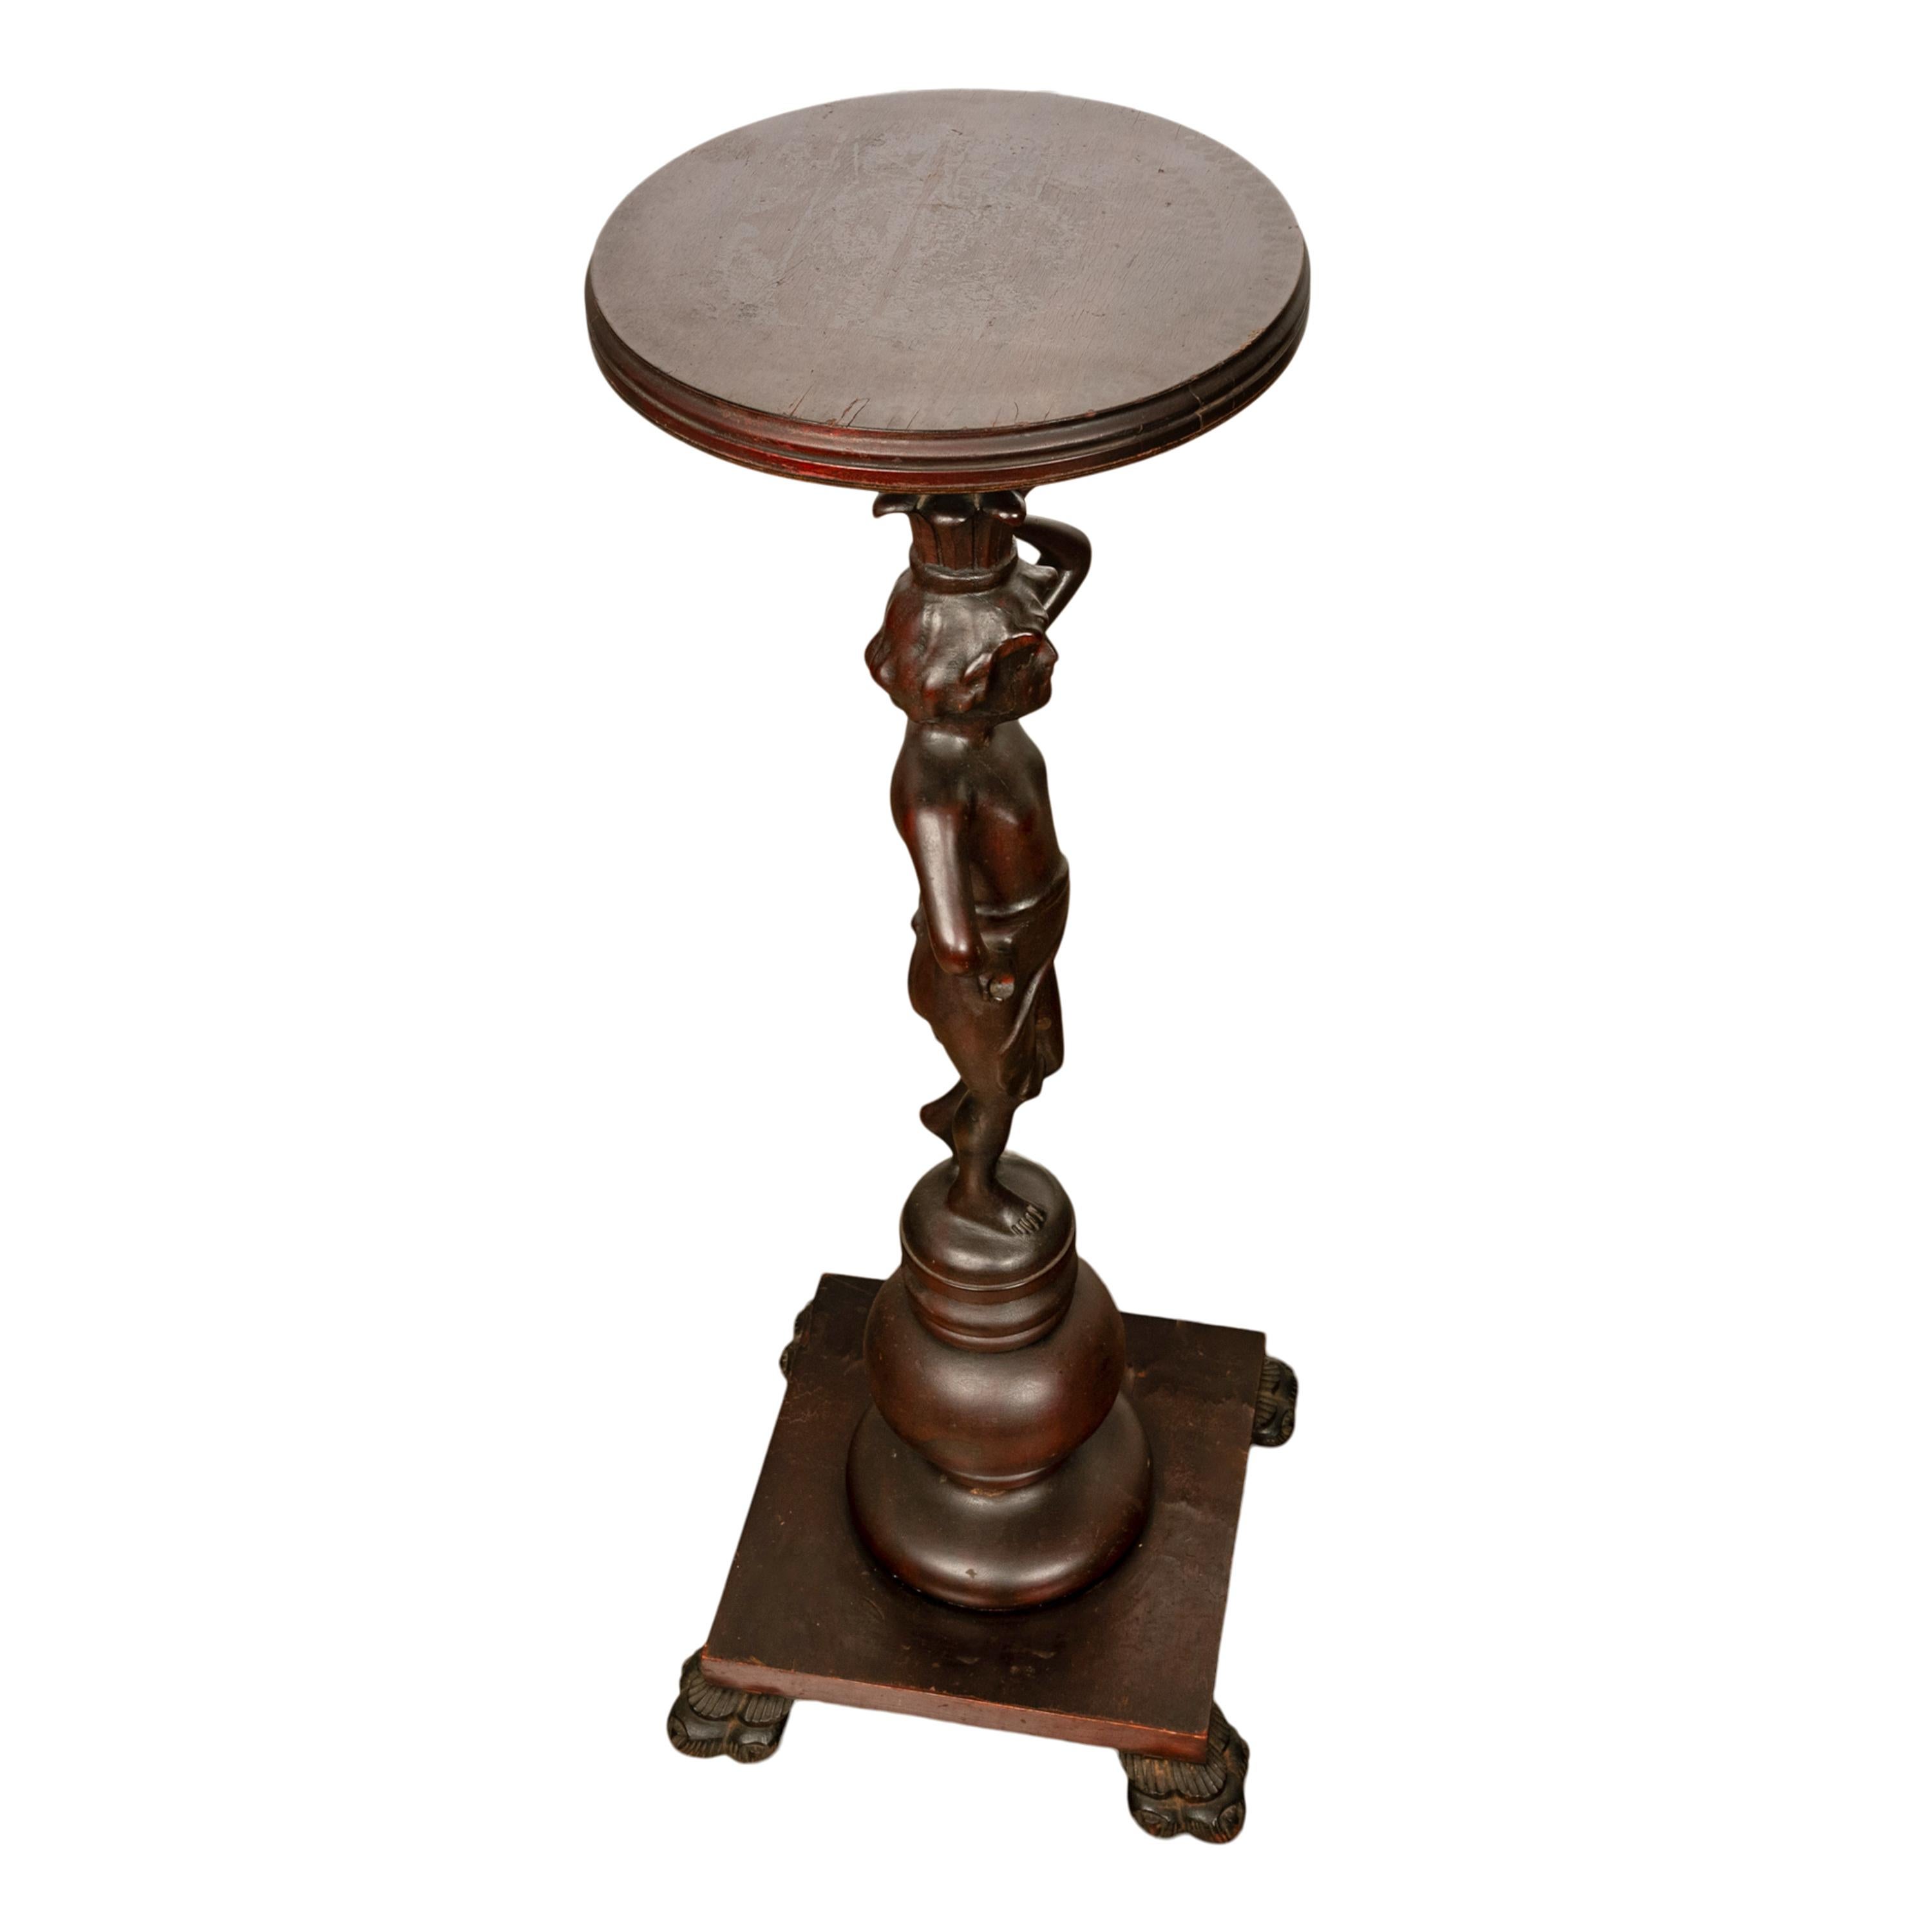 Antique Italian Carved Walnut Statue Pedestal Wine Candle Lamp Stand Table 1900 For Sale 3